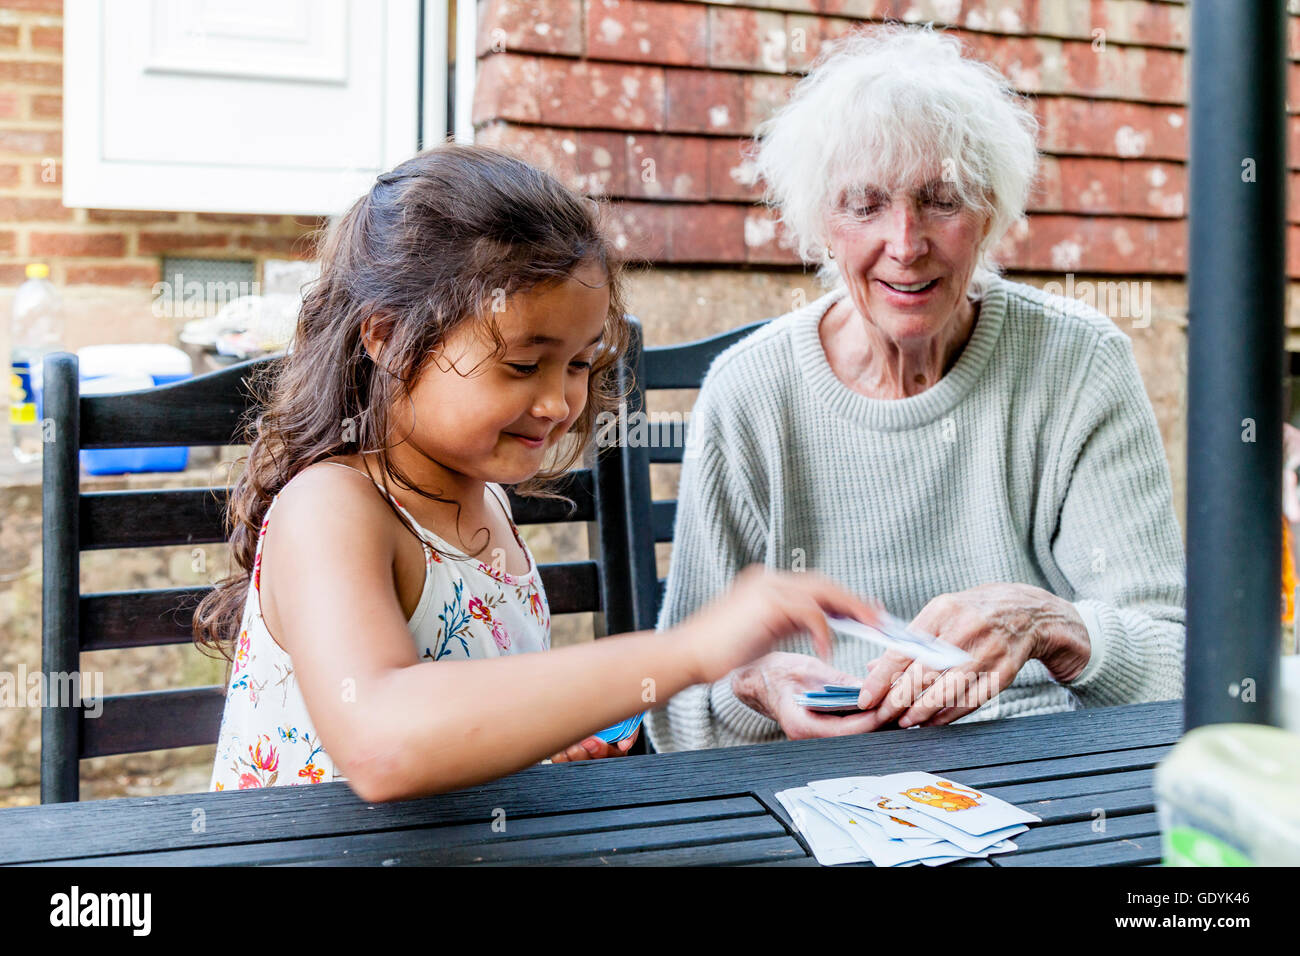 A Mixed Race Child Plays Snap With Her Grandmother, Sussex, UK Stock Photo